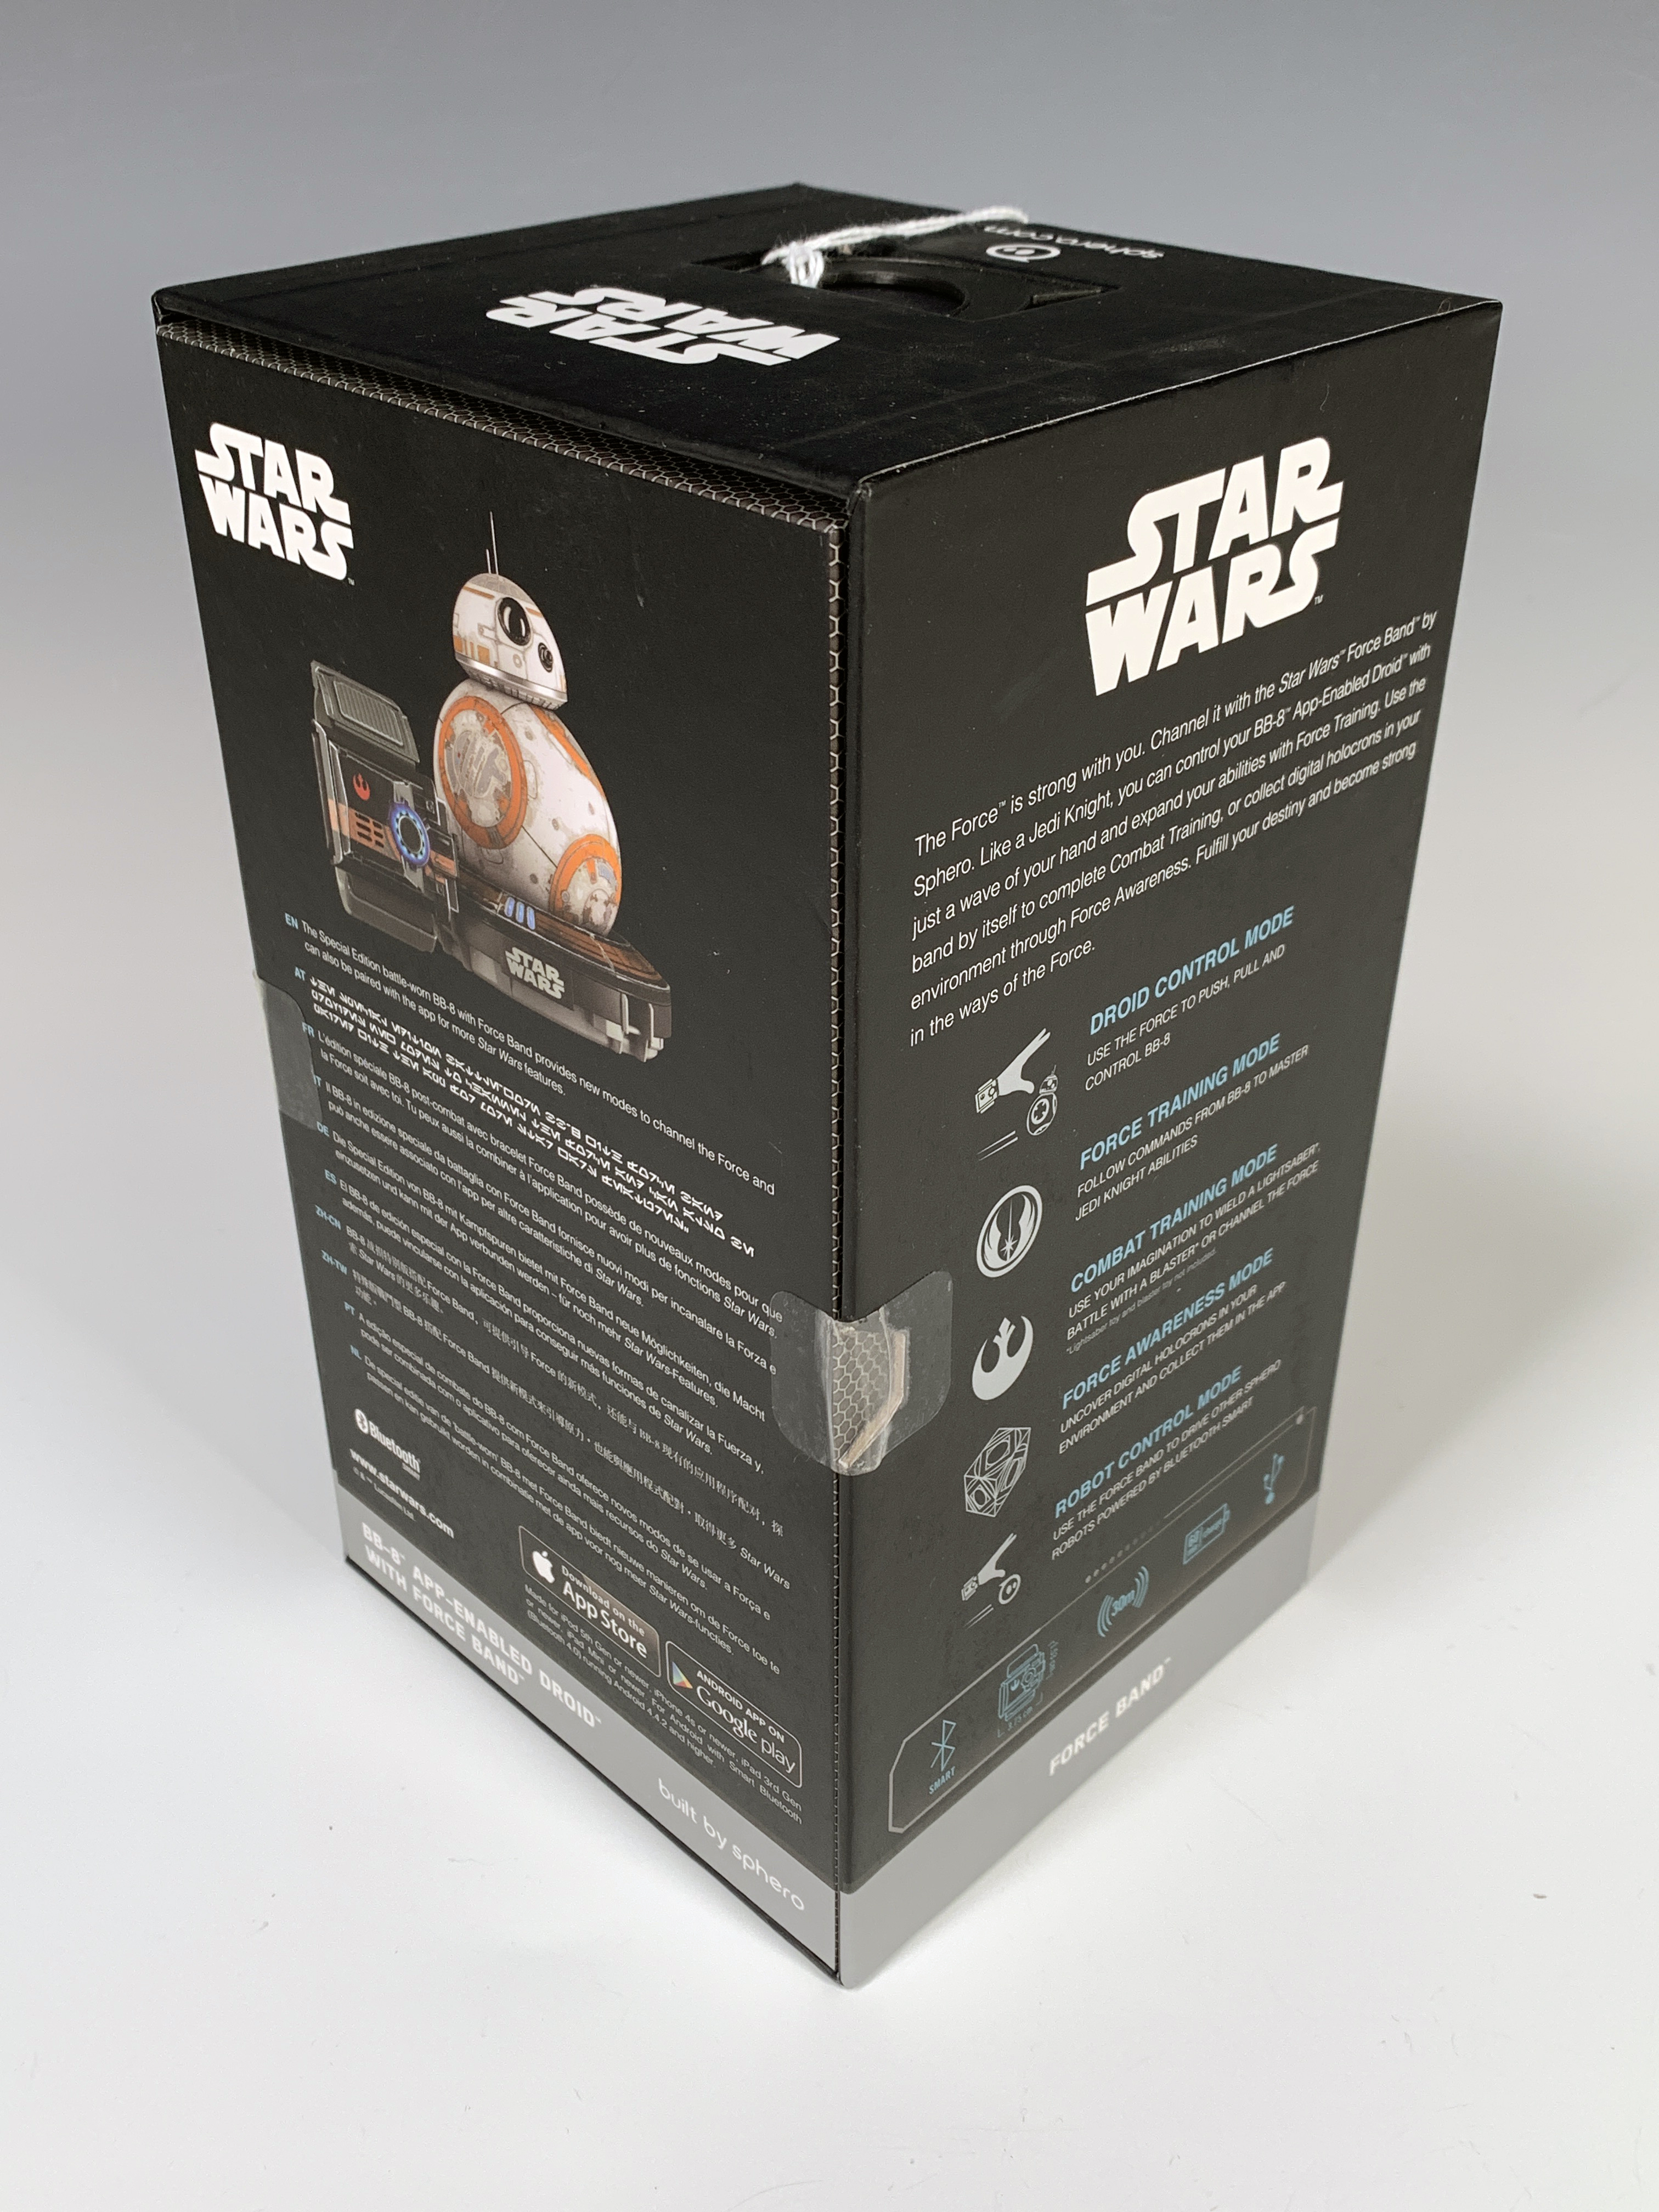 Sphero Star Wars Bb 8 App Enabled Droid W Force Band In Box Sealed image 3